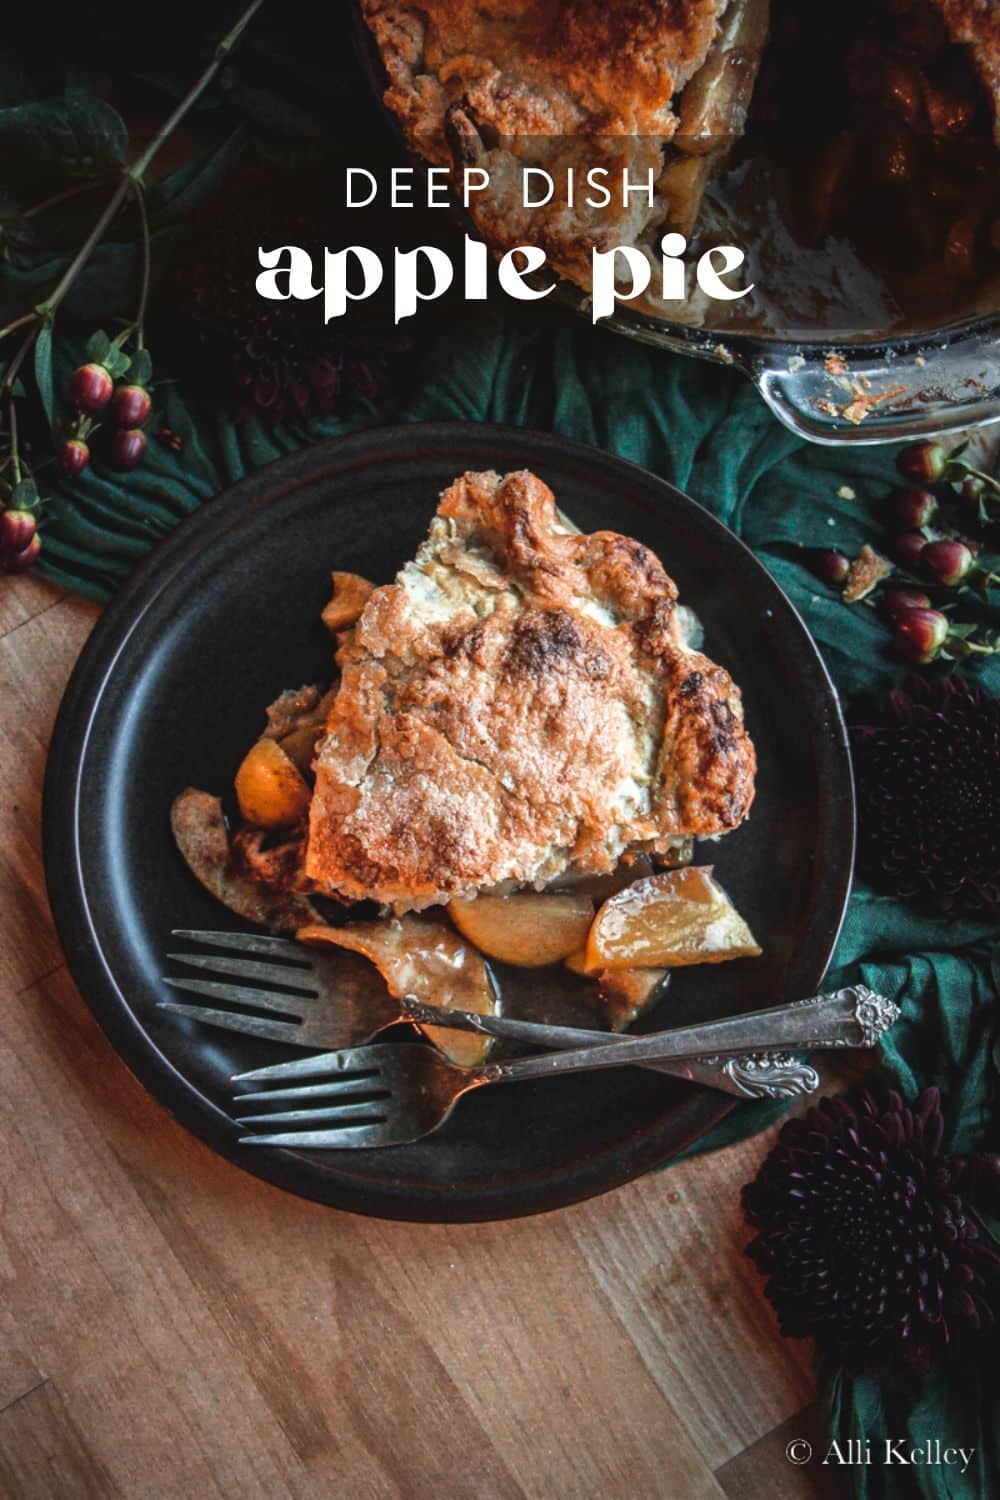 Homemade apple pie can sound intimidating but it really isn't complicated. This homemade apple pie is simple but delicious and the perfect dessert any time of the year. Homemade apple pie is great for Thanksgiving or Christmas. Homemade apple pie isn't hard and this recipe is easy with step-by-step directions! #homemadeapplepie #applepie #longbournfarm #homeamdepie #piefromscratch #easyapplepie #applepiefromscratch